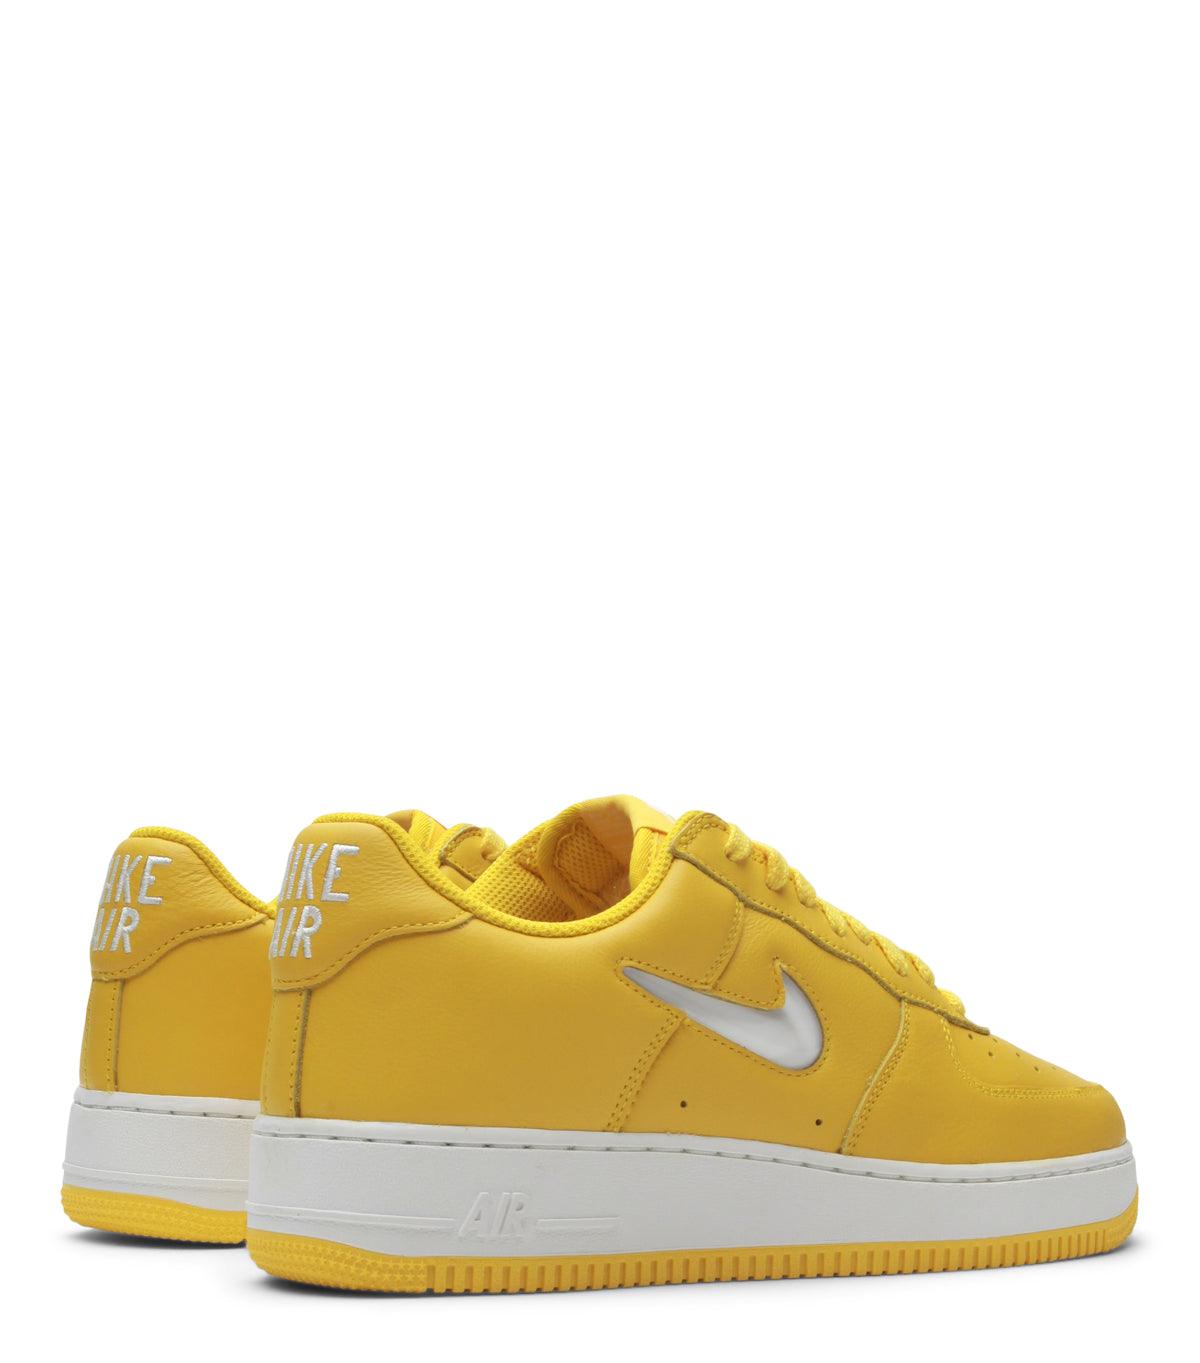 Nike Air Force 1 Low Retro Yellow | SOMEWHERE